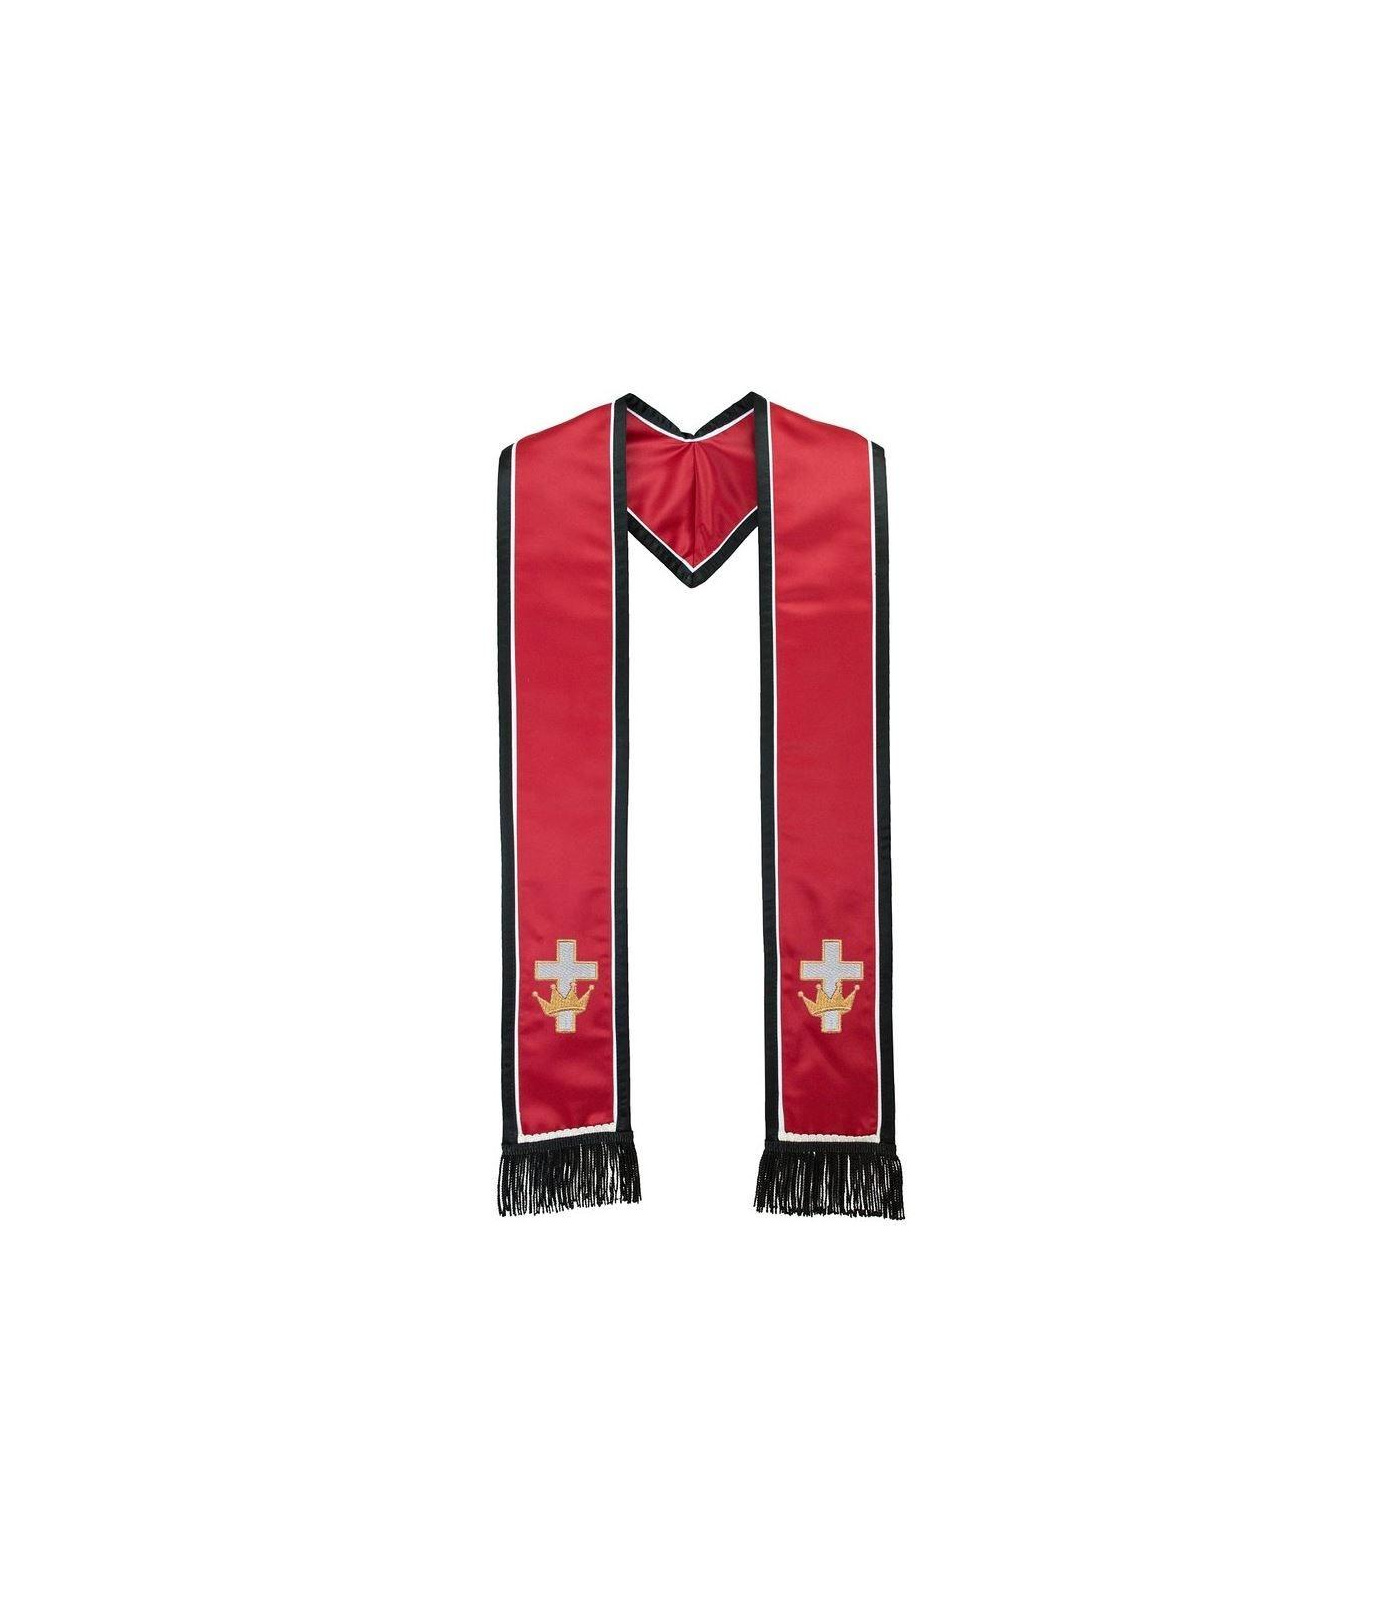 crown_w_cross_clergy_stole_red_dbf